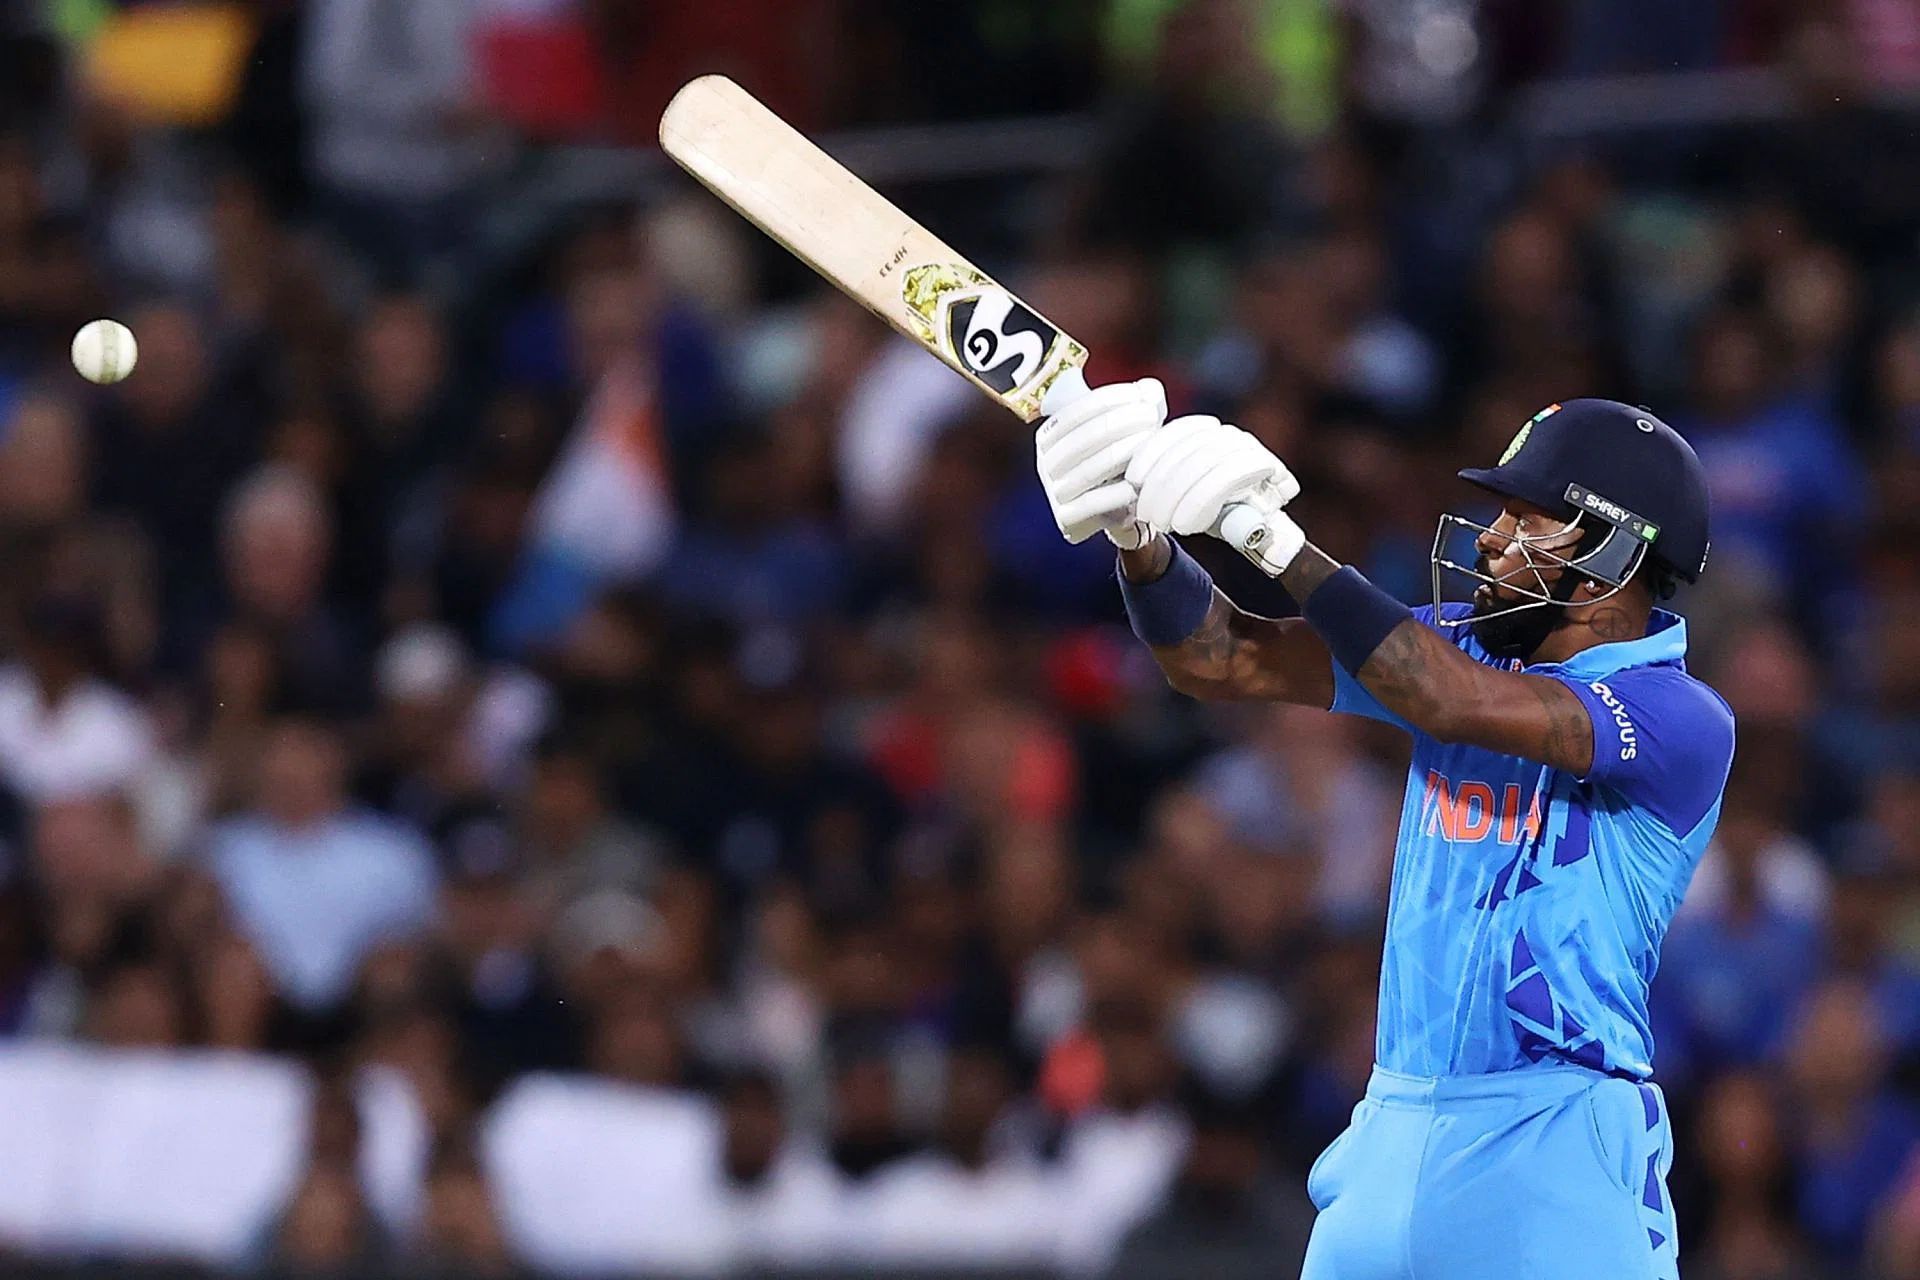 Hardik Pandya, who had a mixed tournament with the bat, lifted himself in the semis and played an extraordinary knock, cracking 63 in only 33 balls with four fours and five sixes. His knock took the team to a competitive total of 168/6. Pic: Getty Images